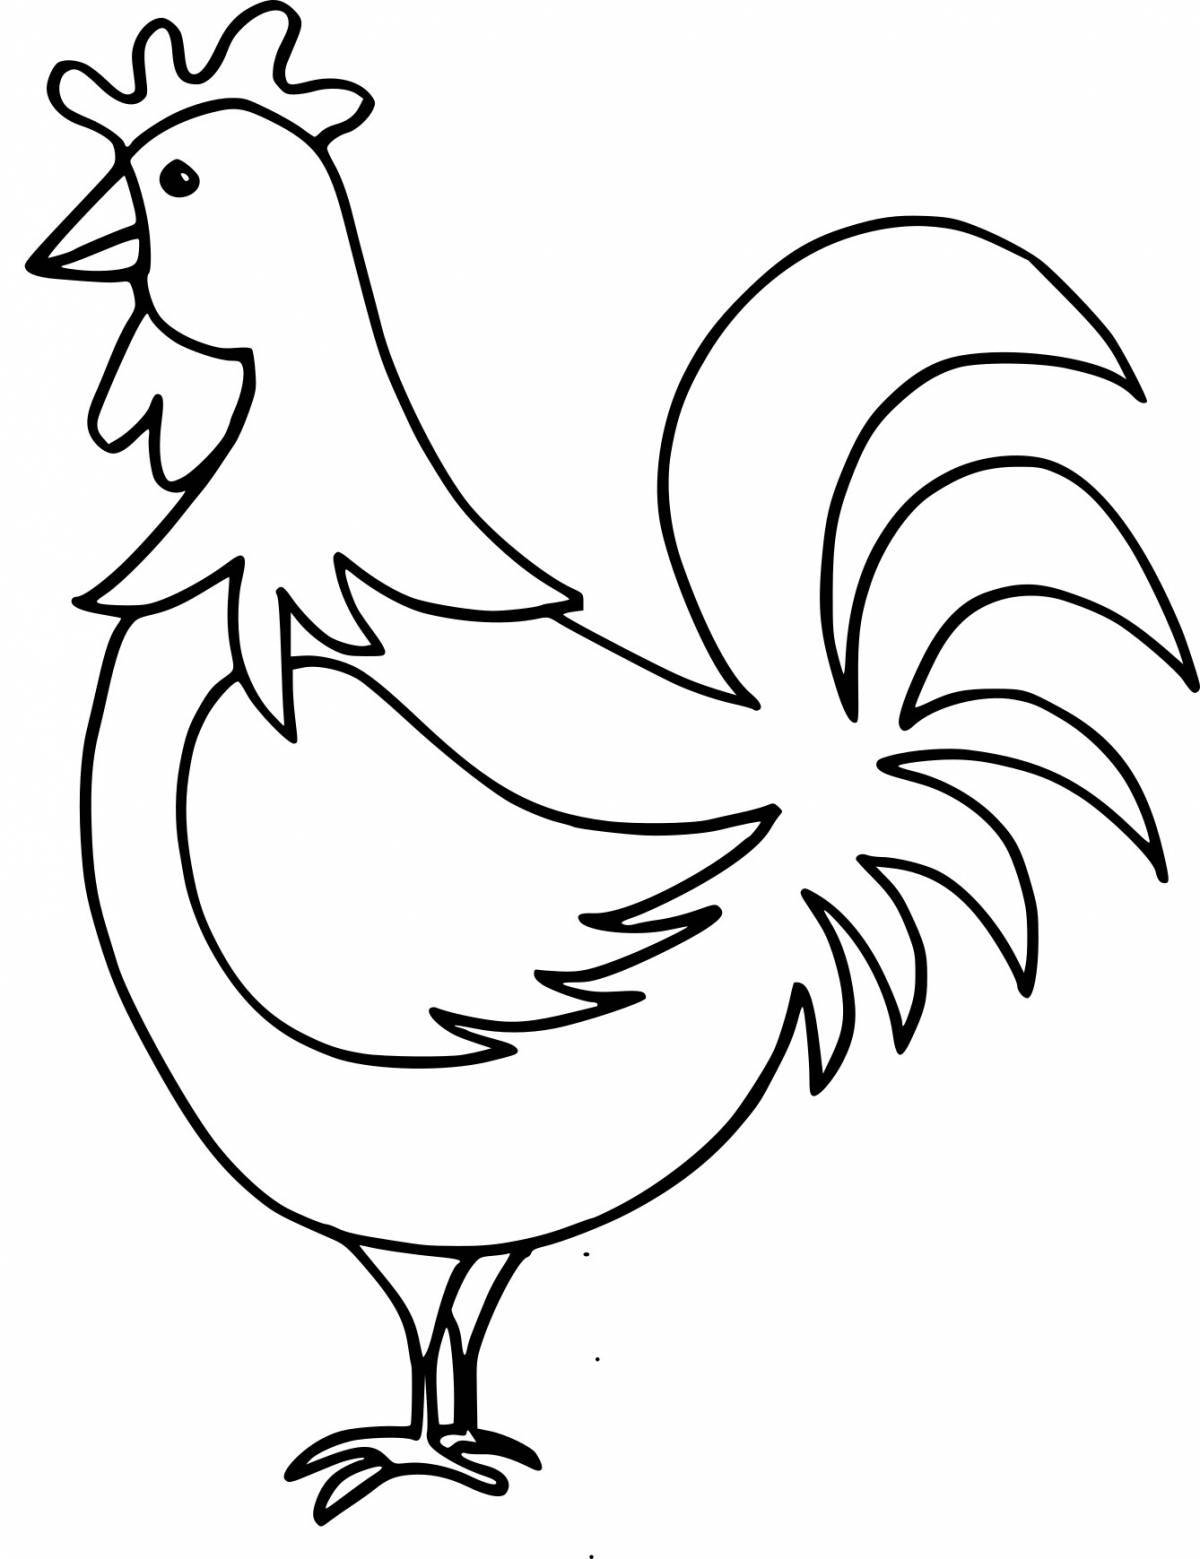 Children's cockerel coloring pages for kids